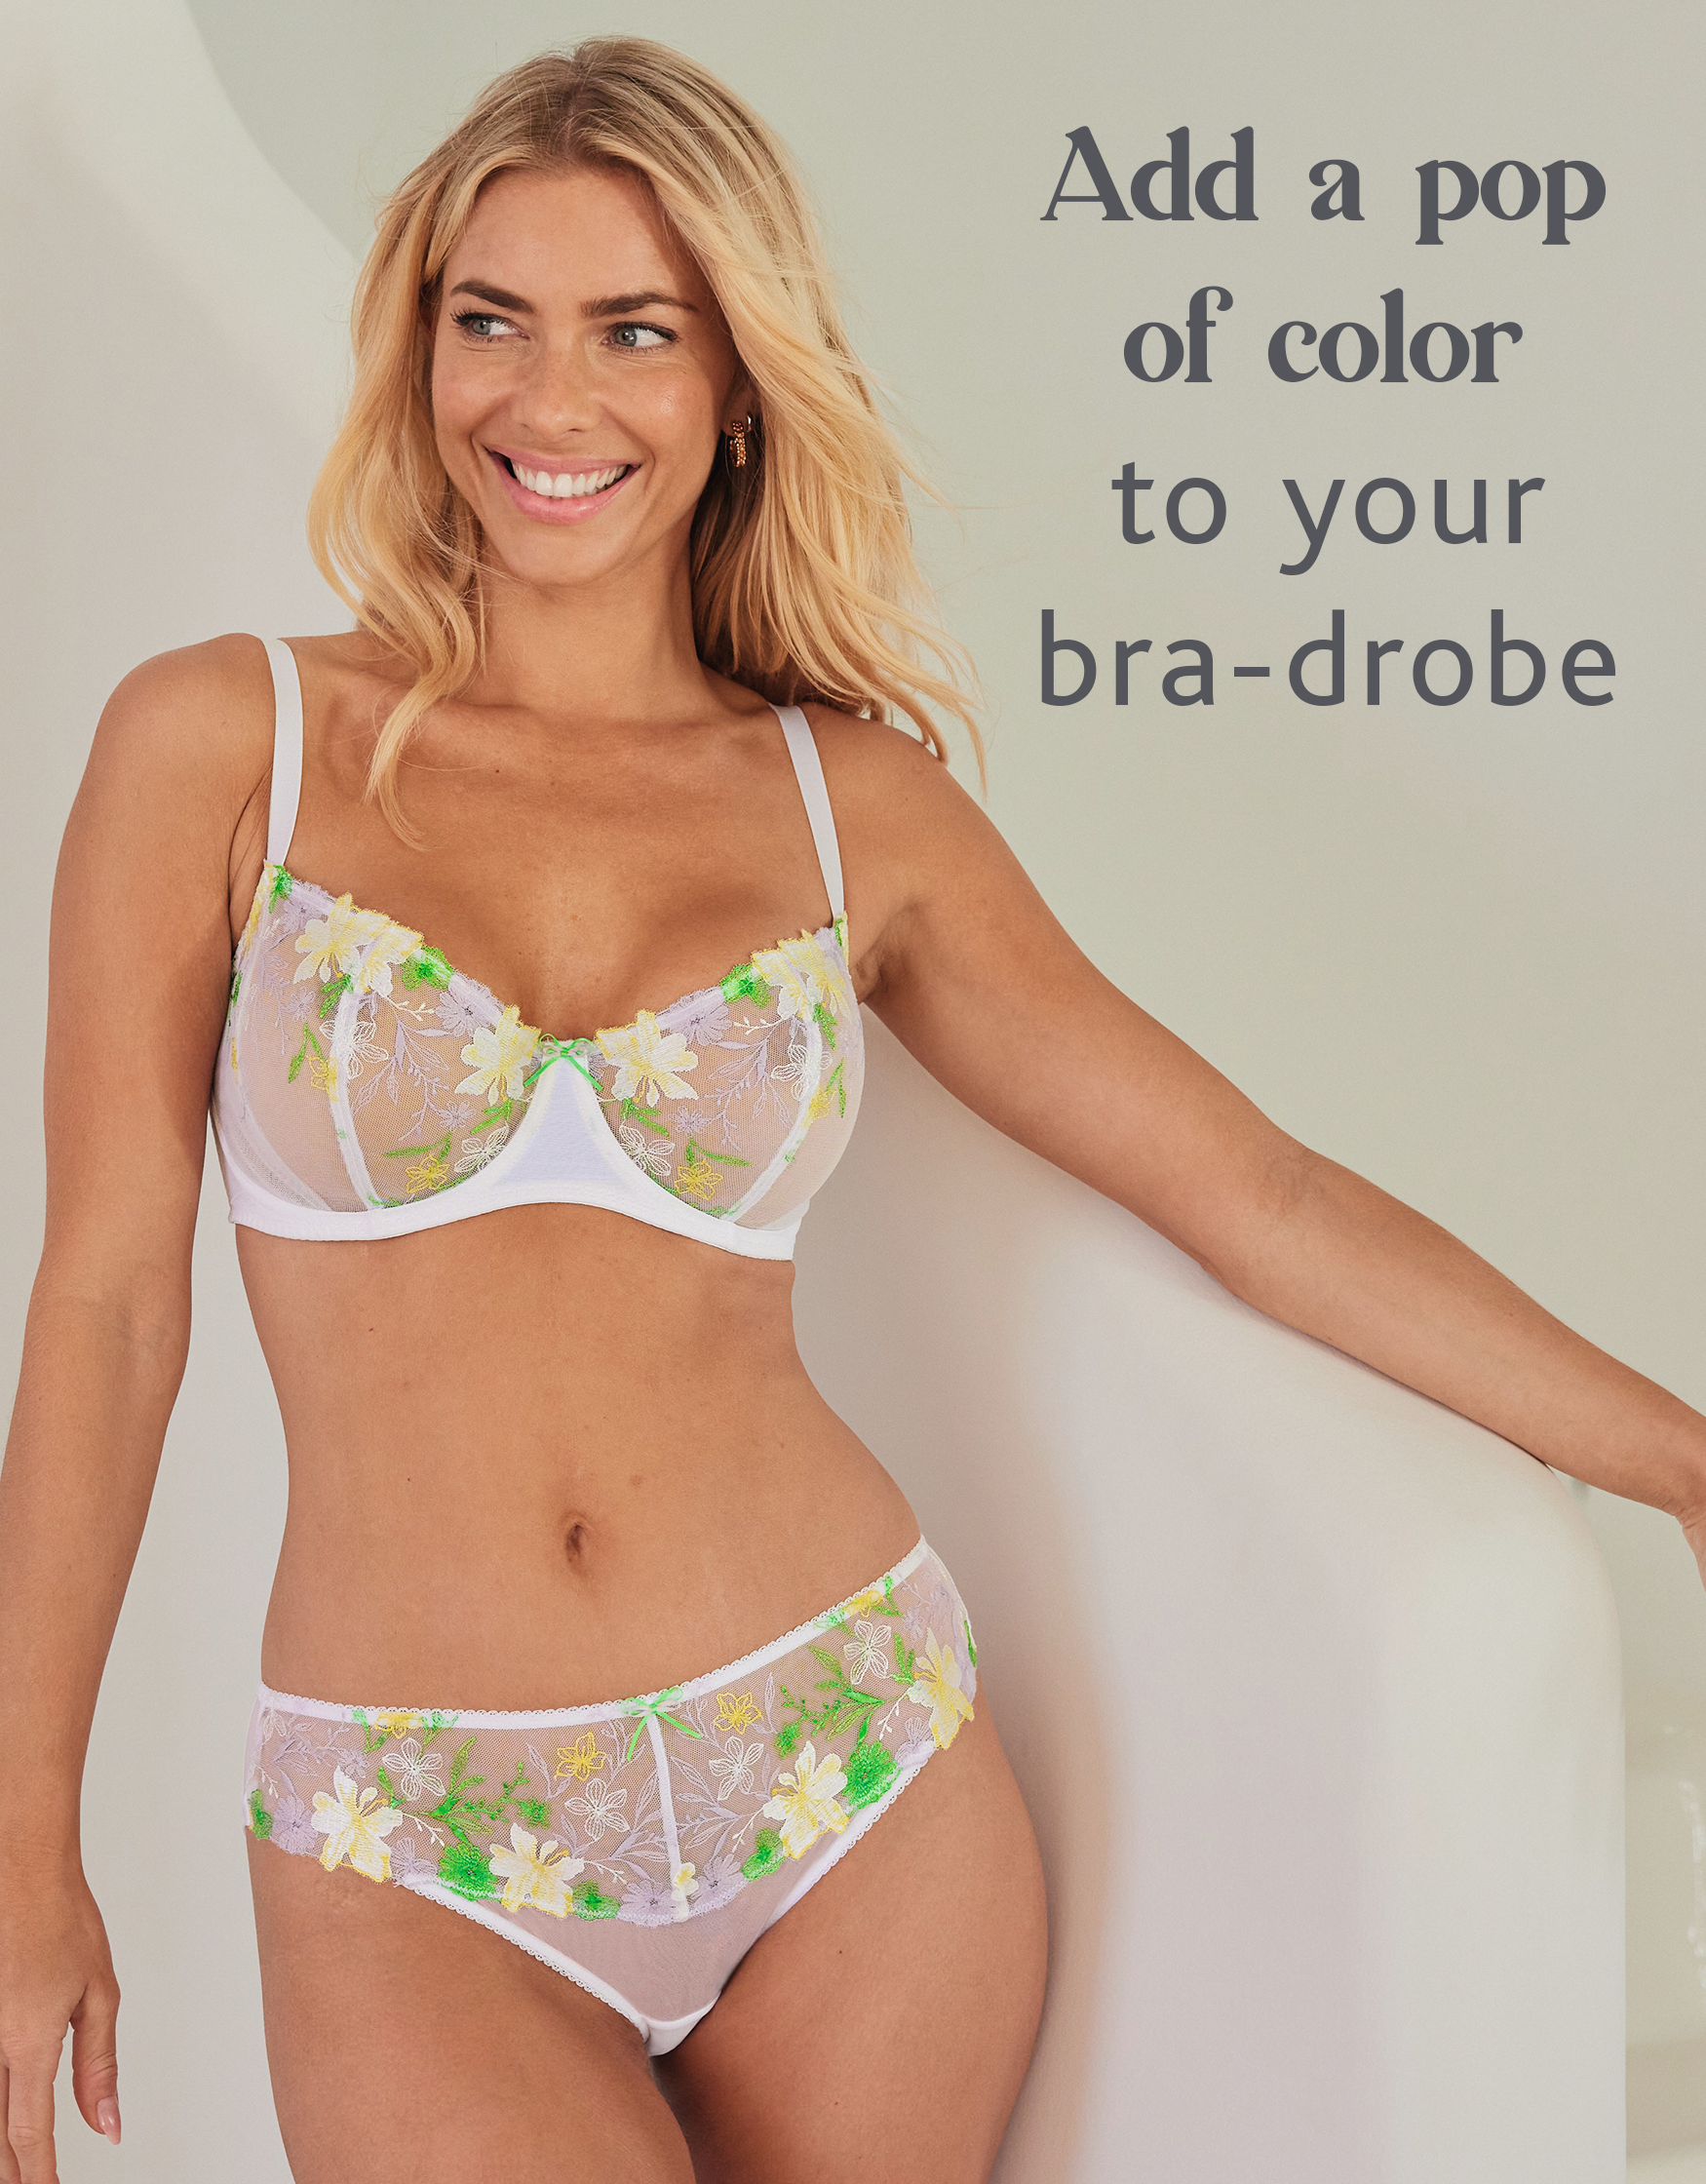 Bra Shopping 101 with Bravissimo - Beauty News NYC - The First Online  Beauty Magazine